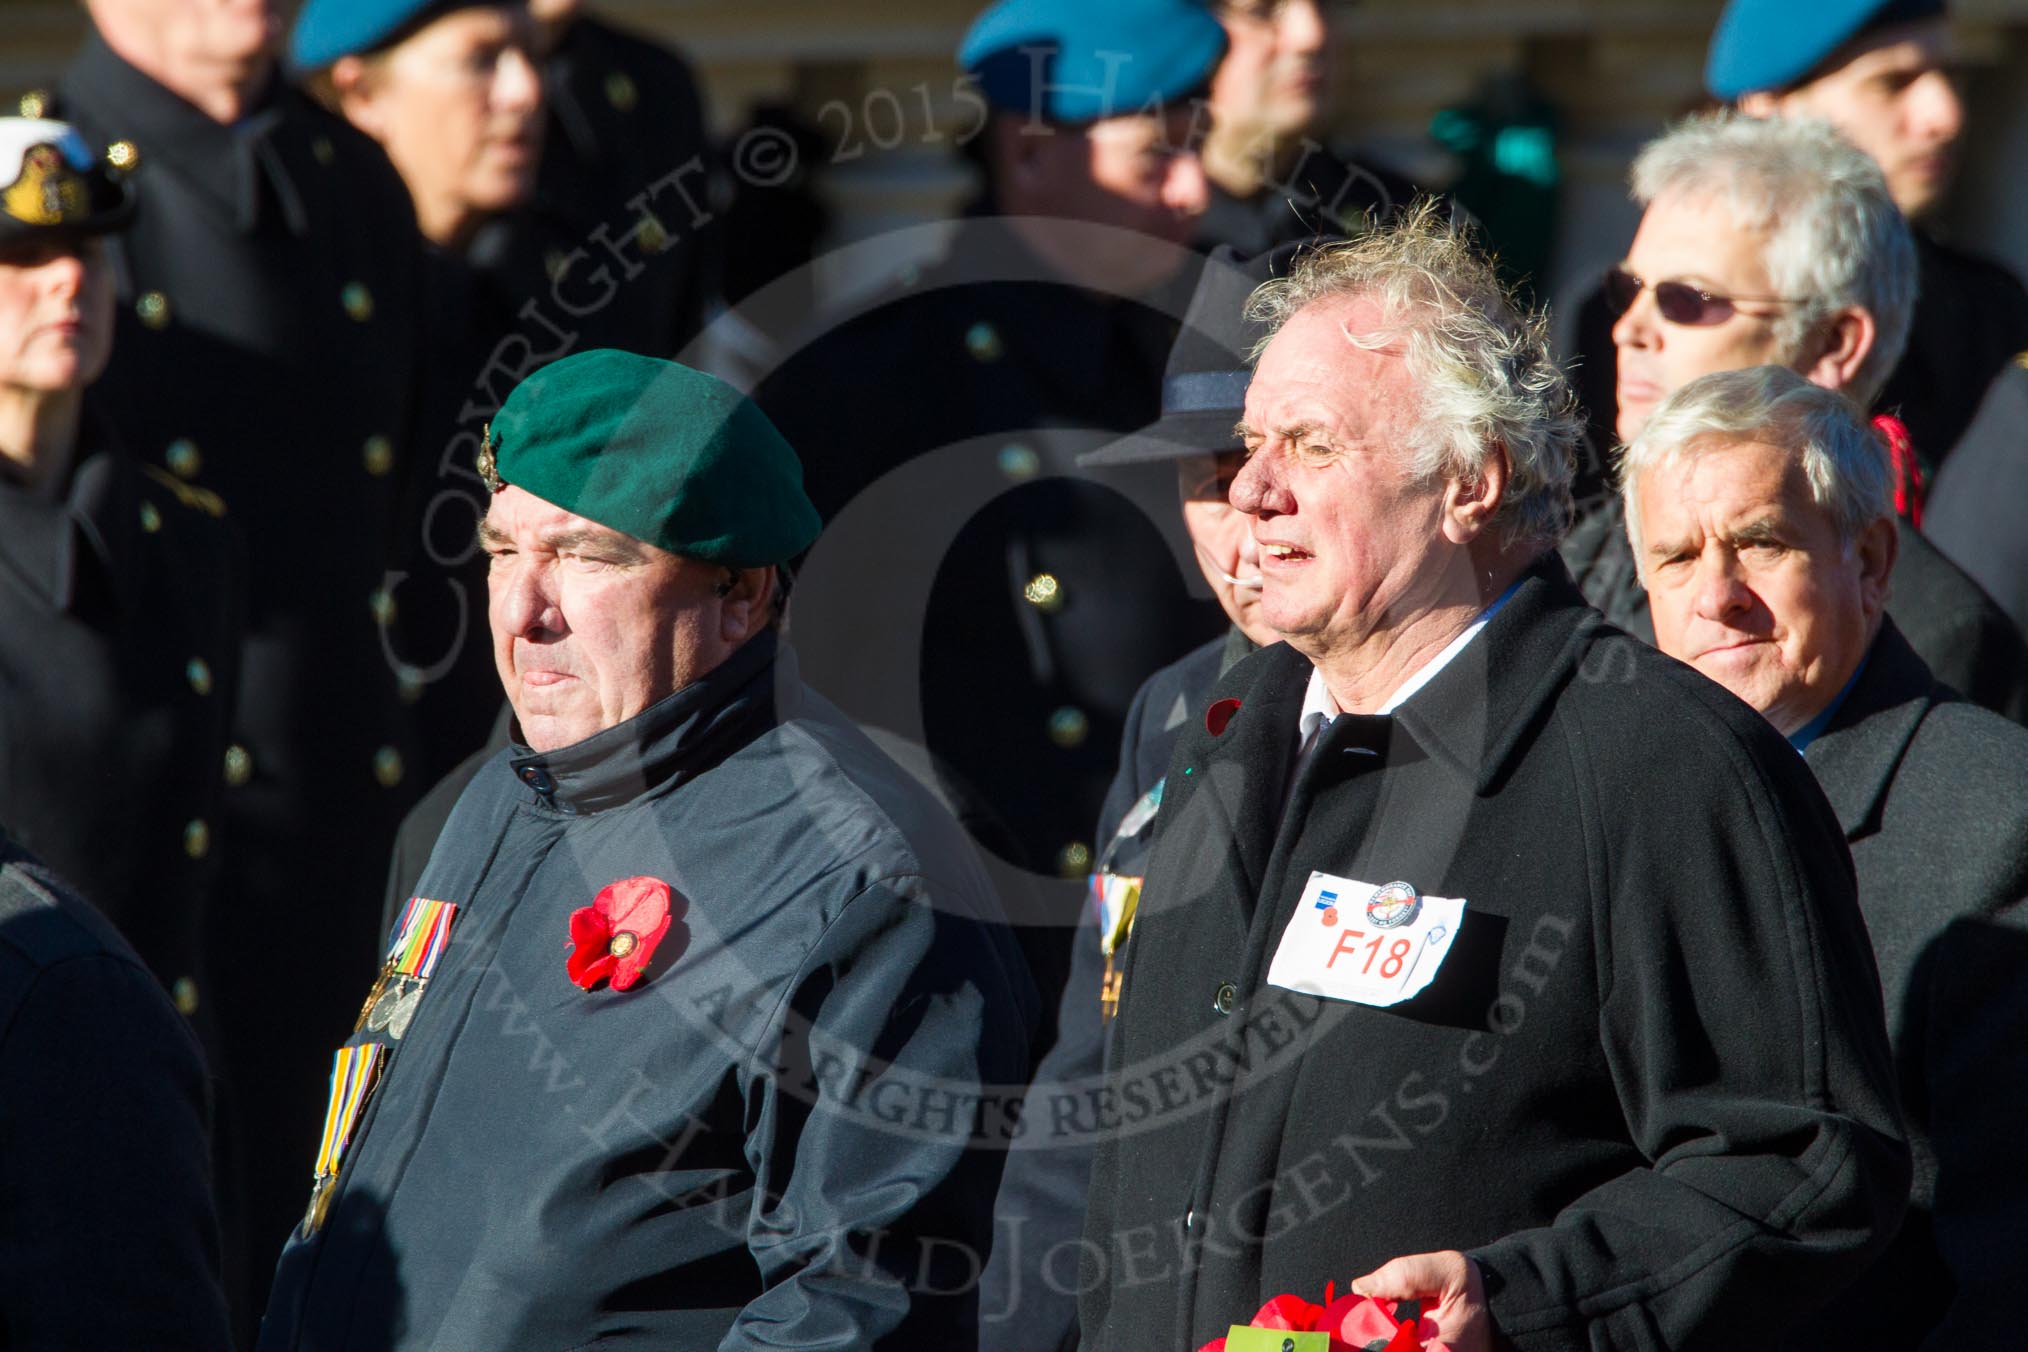 Remembrance Sunday Cenotaph March Past 2013: F18 - Showmens' Guild of Great Britain..
Press stand opposite the Foreign Office building, Whitehall, London SW1,
London,
Greater London,
United Kingdom,
on 10 November 2013 at 11:52, image #932